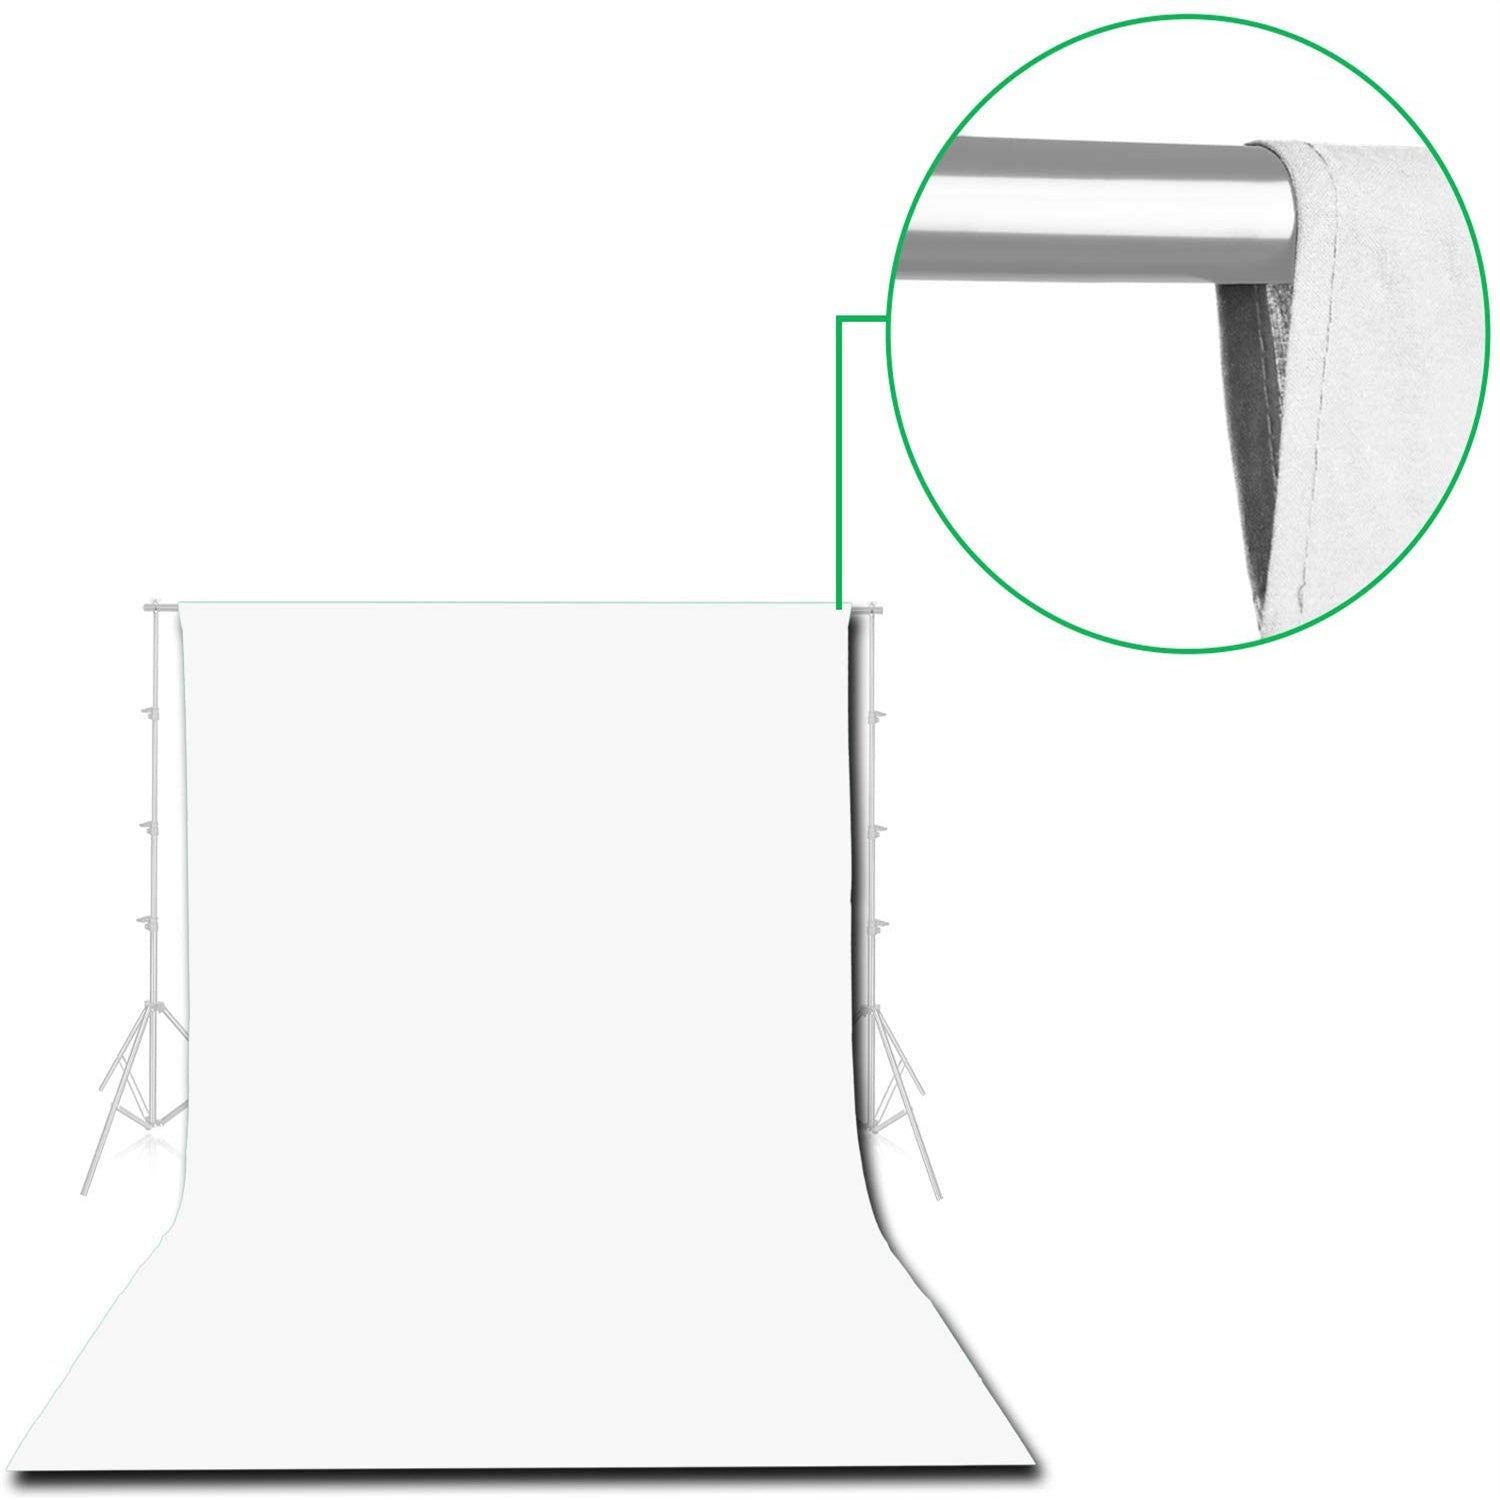 EMART Four Sizes Muslin White Background with 4 Backdrop Clamps